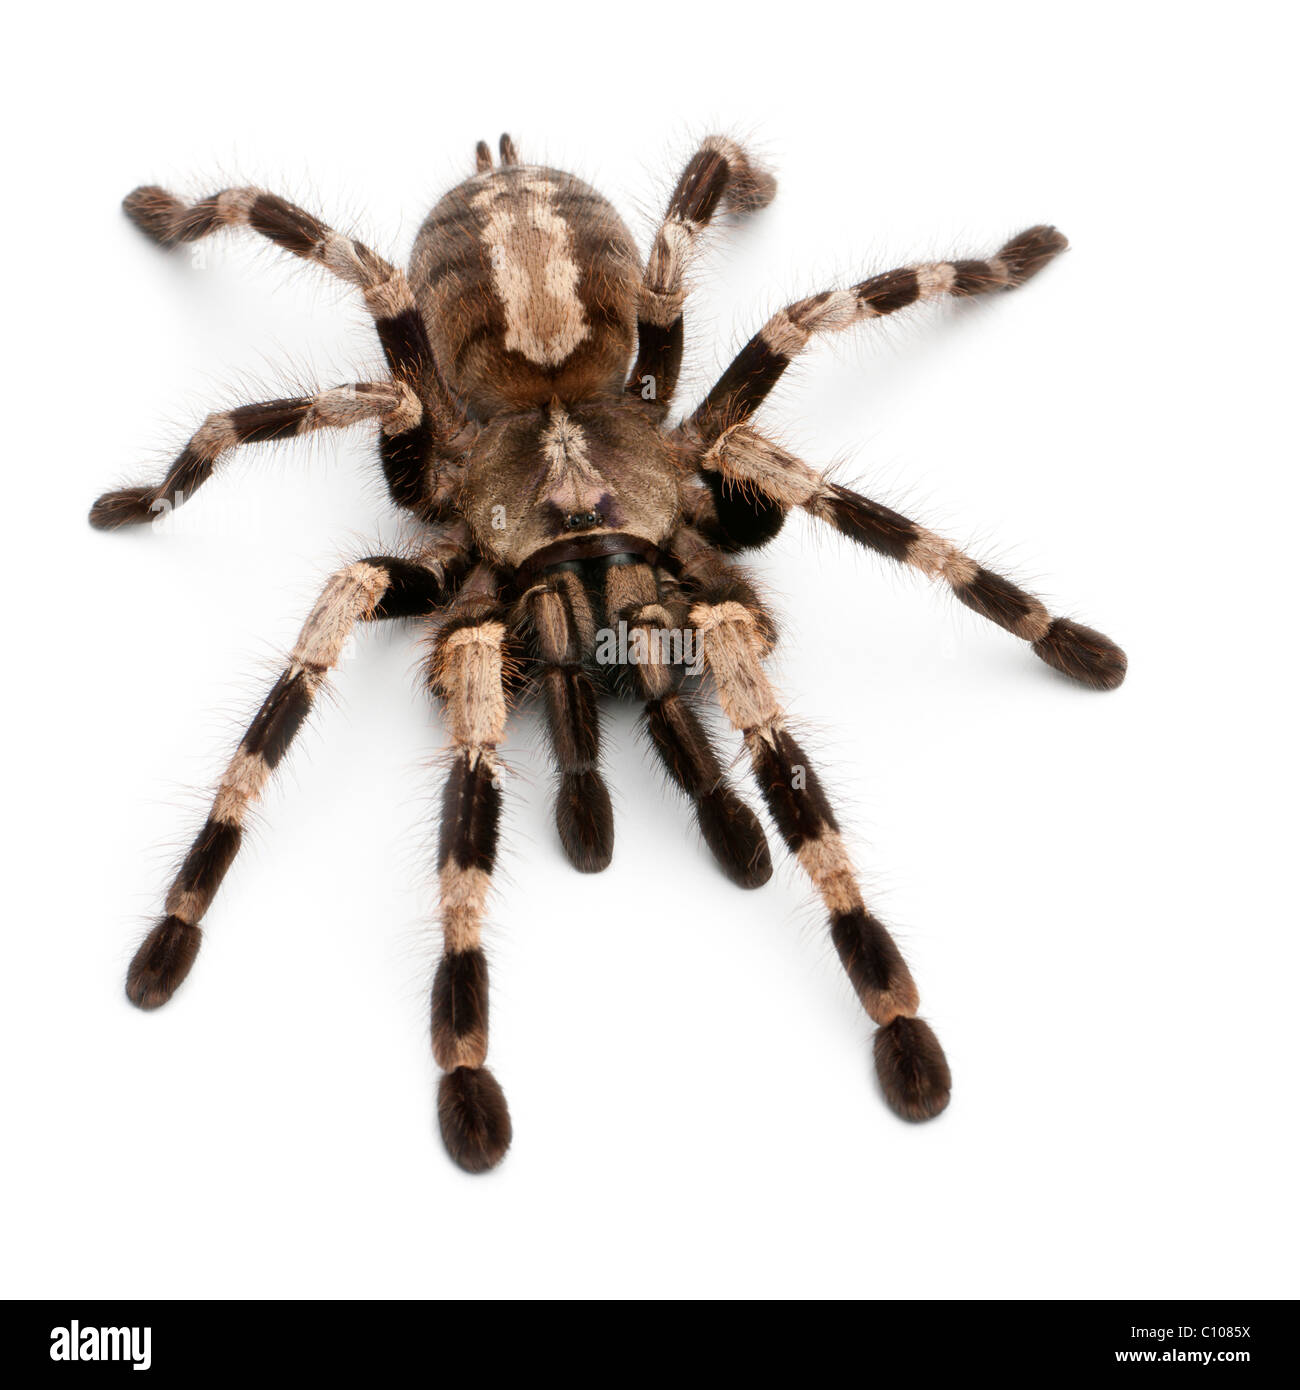 Tarantula spider, Poecilotheria Miranda, in front of white background Banque D'Images